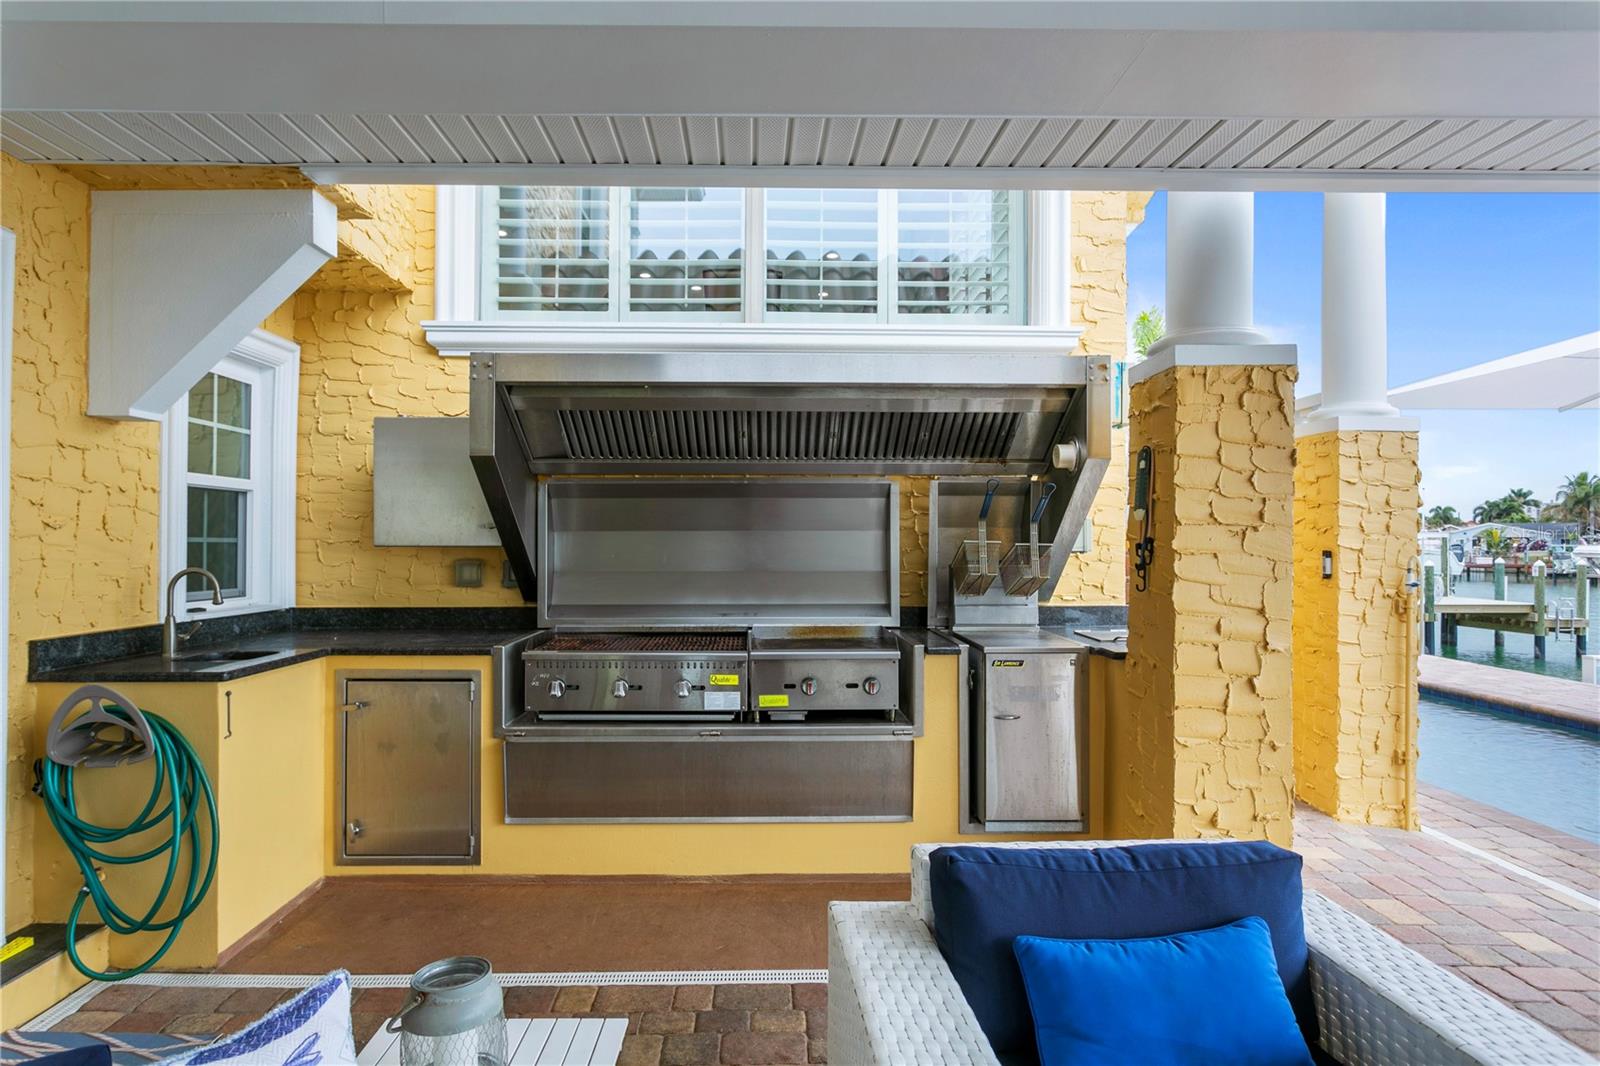 Commercial gas, outdoor kitchen